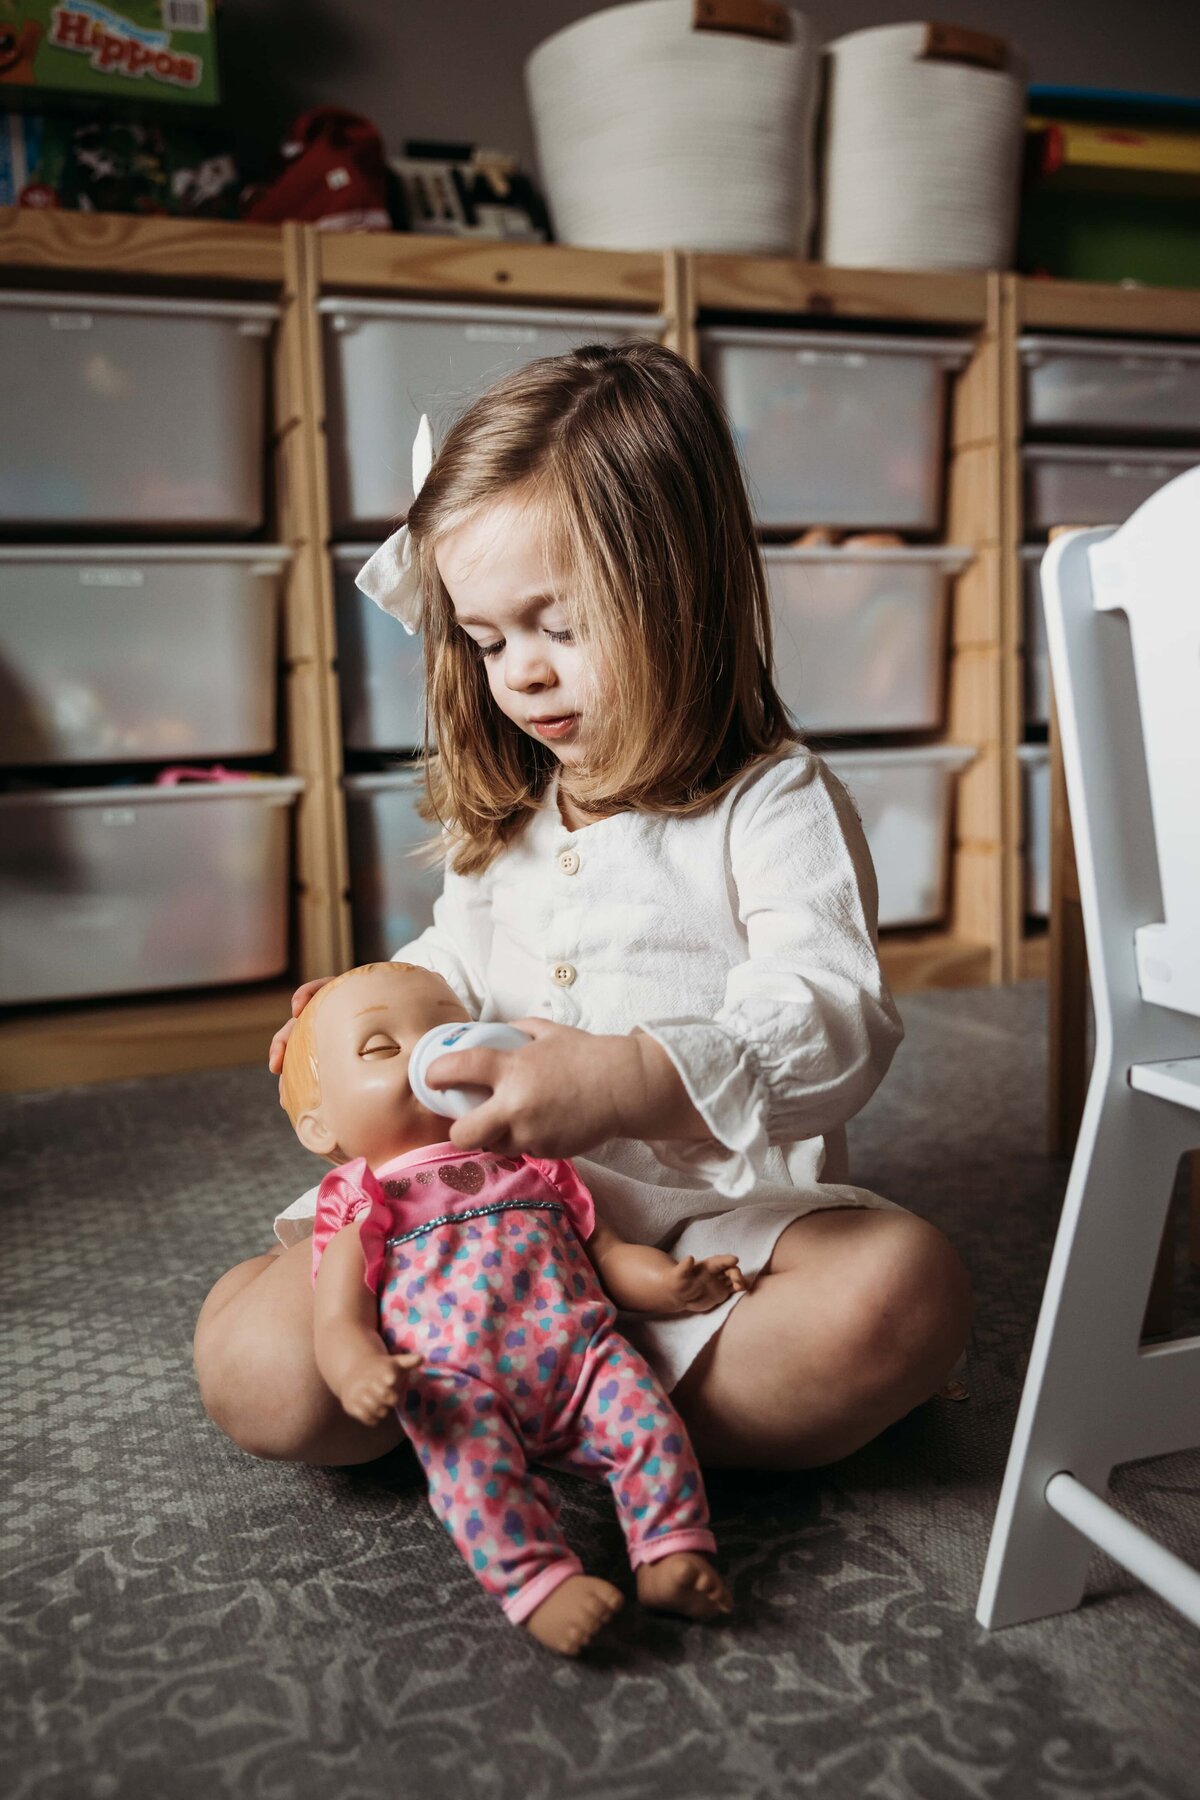 A young child captures a diy family photo moment by feeding a doll with a toy bottle in a playroom.